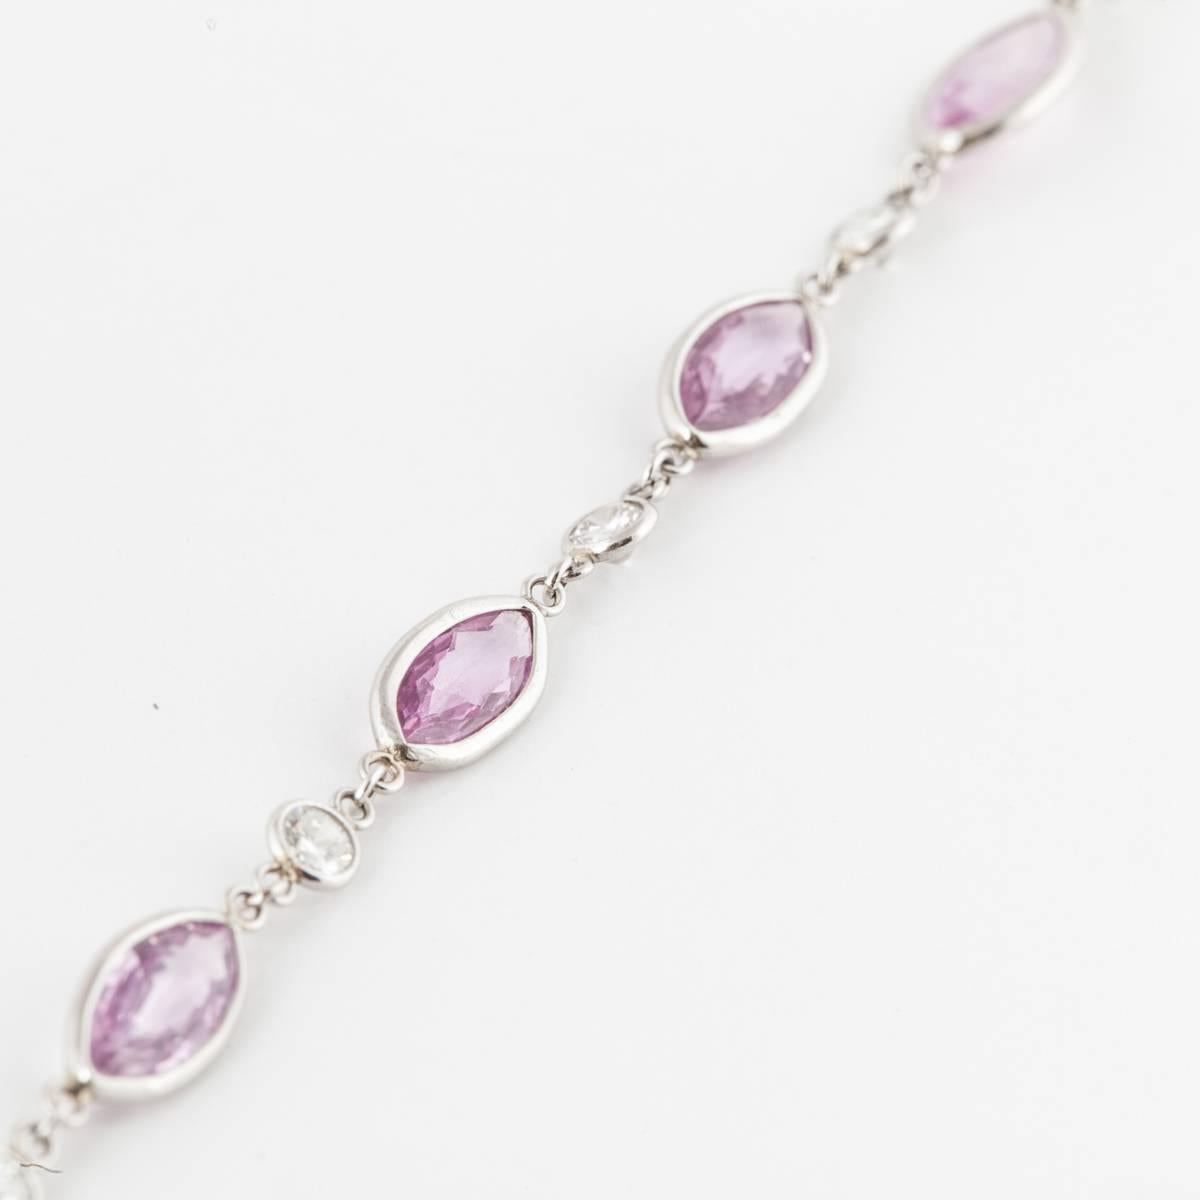 Platinum sapphire and diamond by the yard style chain necklace featuring 49 marquise-shaped pink sapphires and 49 round diamonds.  The sapphires and diamonds are in an alternating pattern.  The sapphires total 33.90 carats and the diamonds total